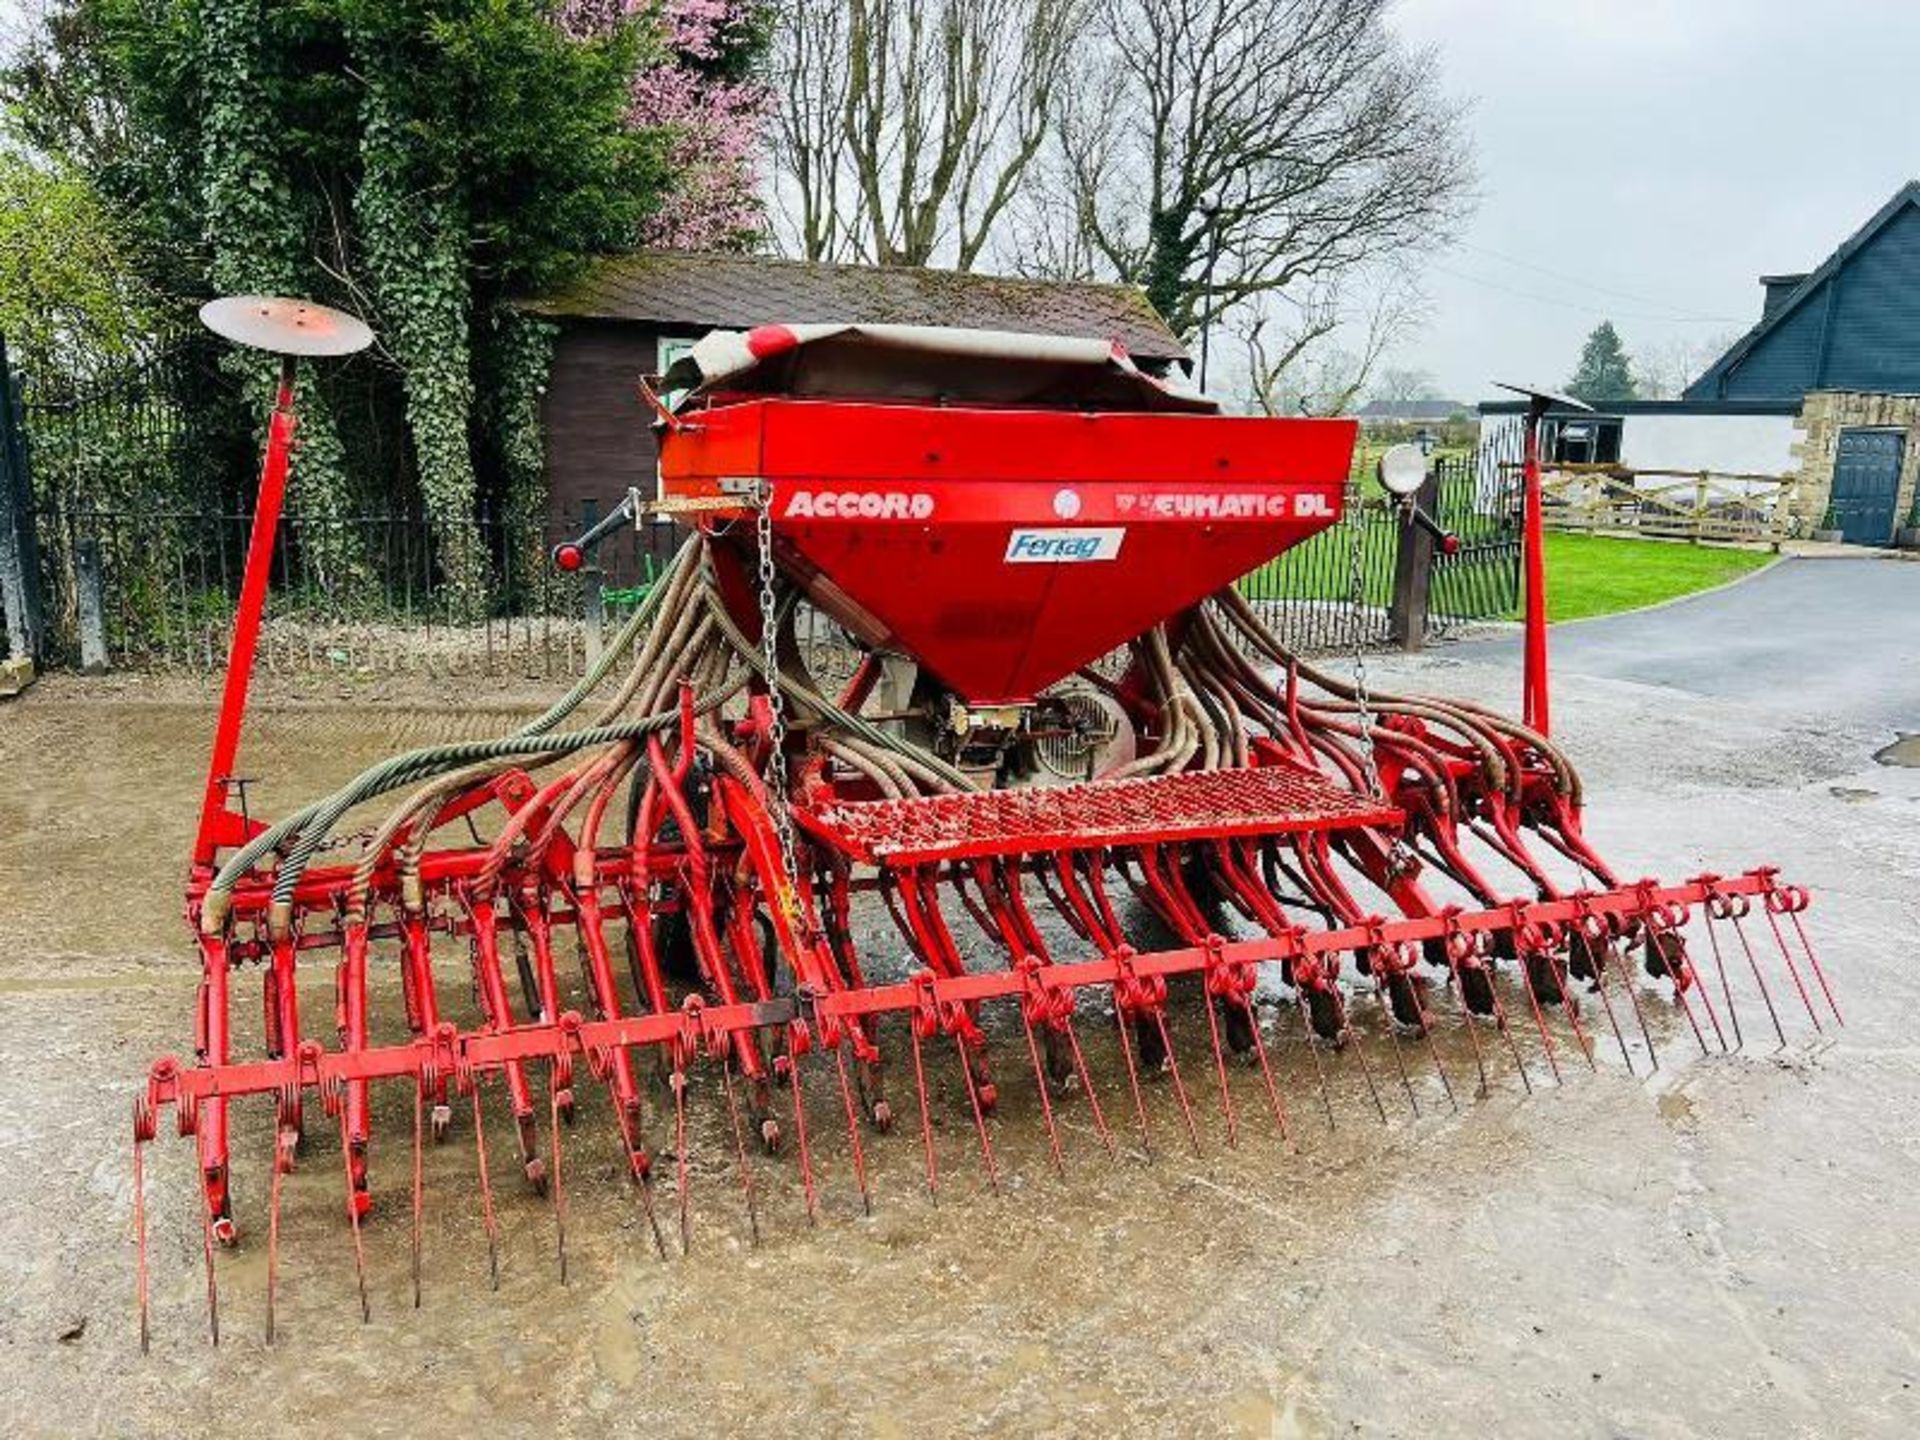 ACCORD TYPE D SEED DRILL C/W EXTENDABLE ARMS - Image 2 of 10